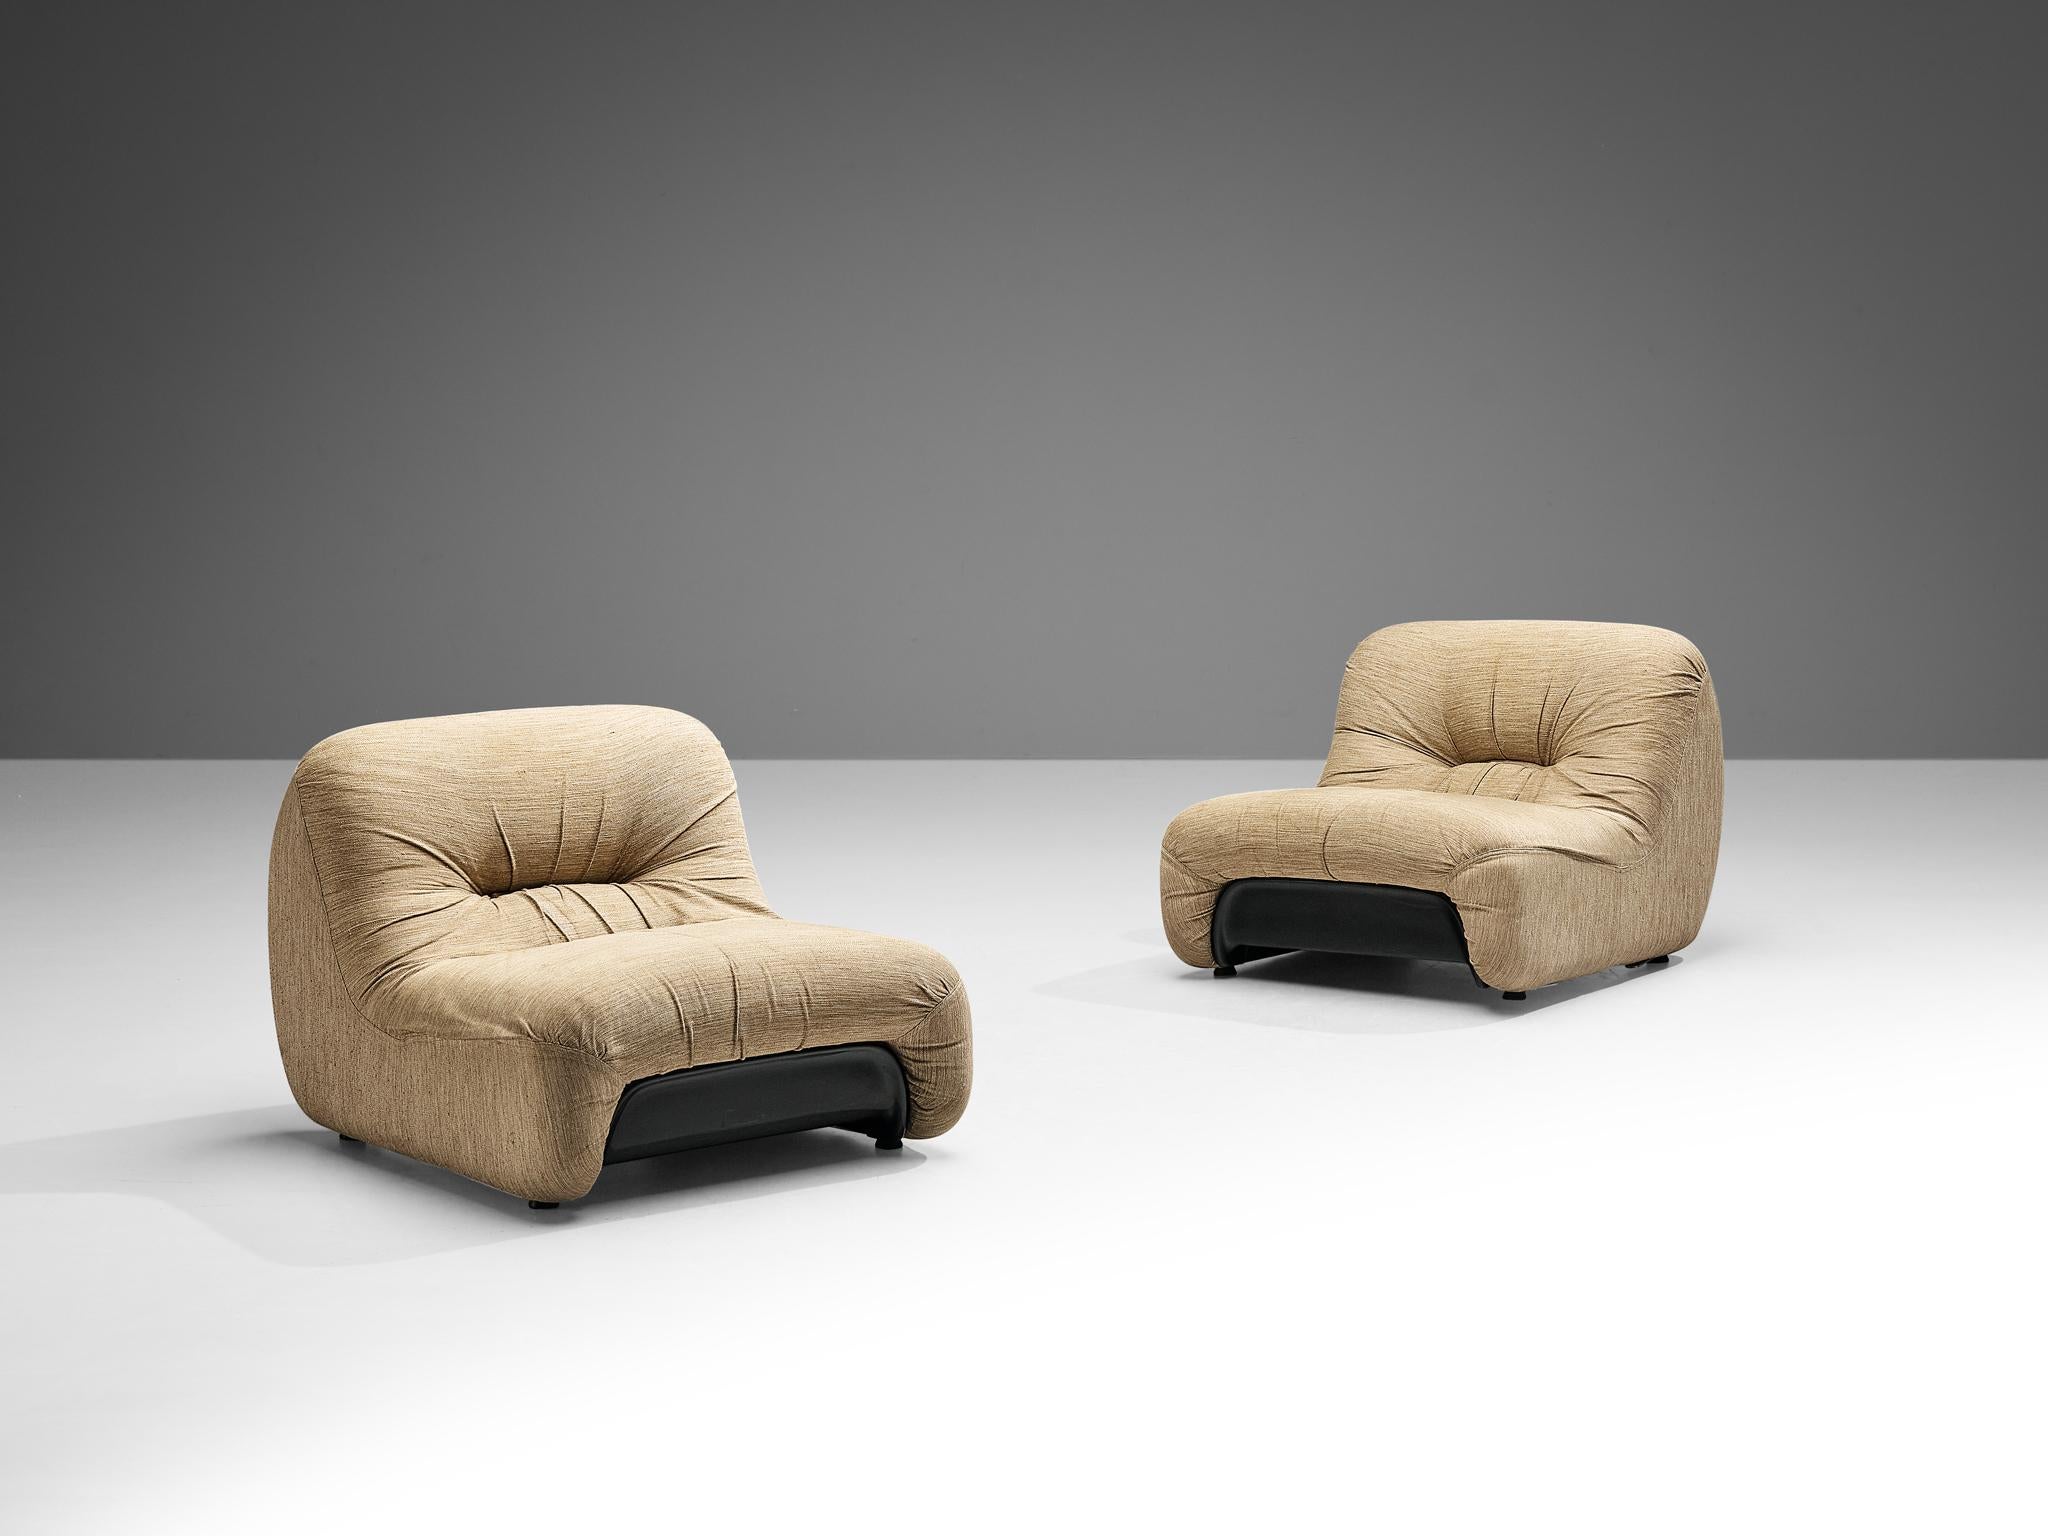 Diego Mattu for 1P, pair of 'Malù' lounge chairs, fabric, ABS plastic, Italy, 1969

Diego Mattu's Malù creation introduces exceptionally cozy lounge chairs produced by the Italian company 1P. These chairs are made to reach an ultimate level of